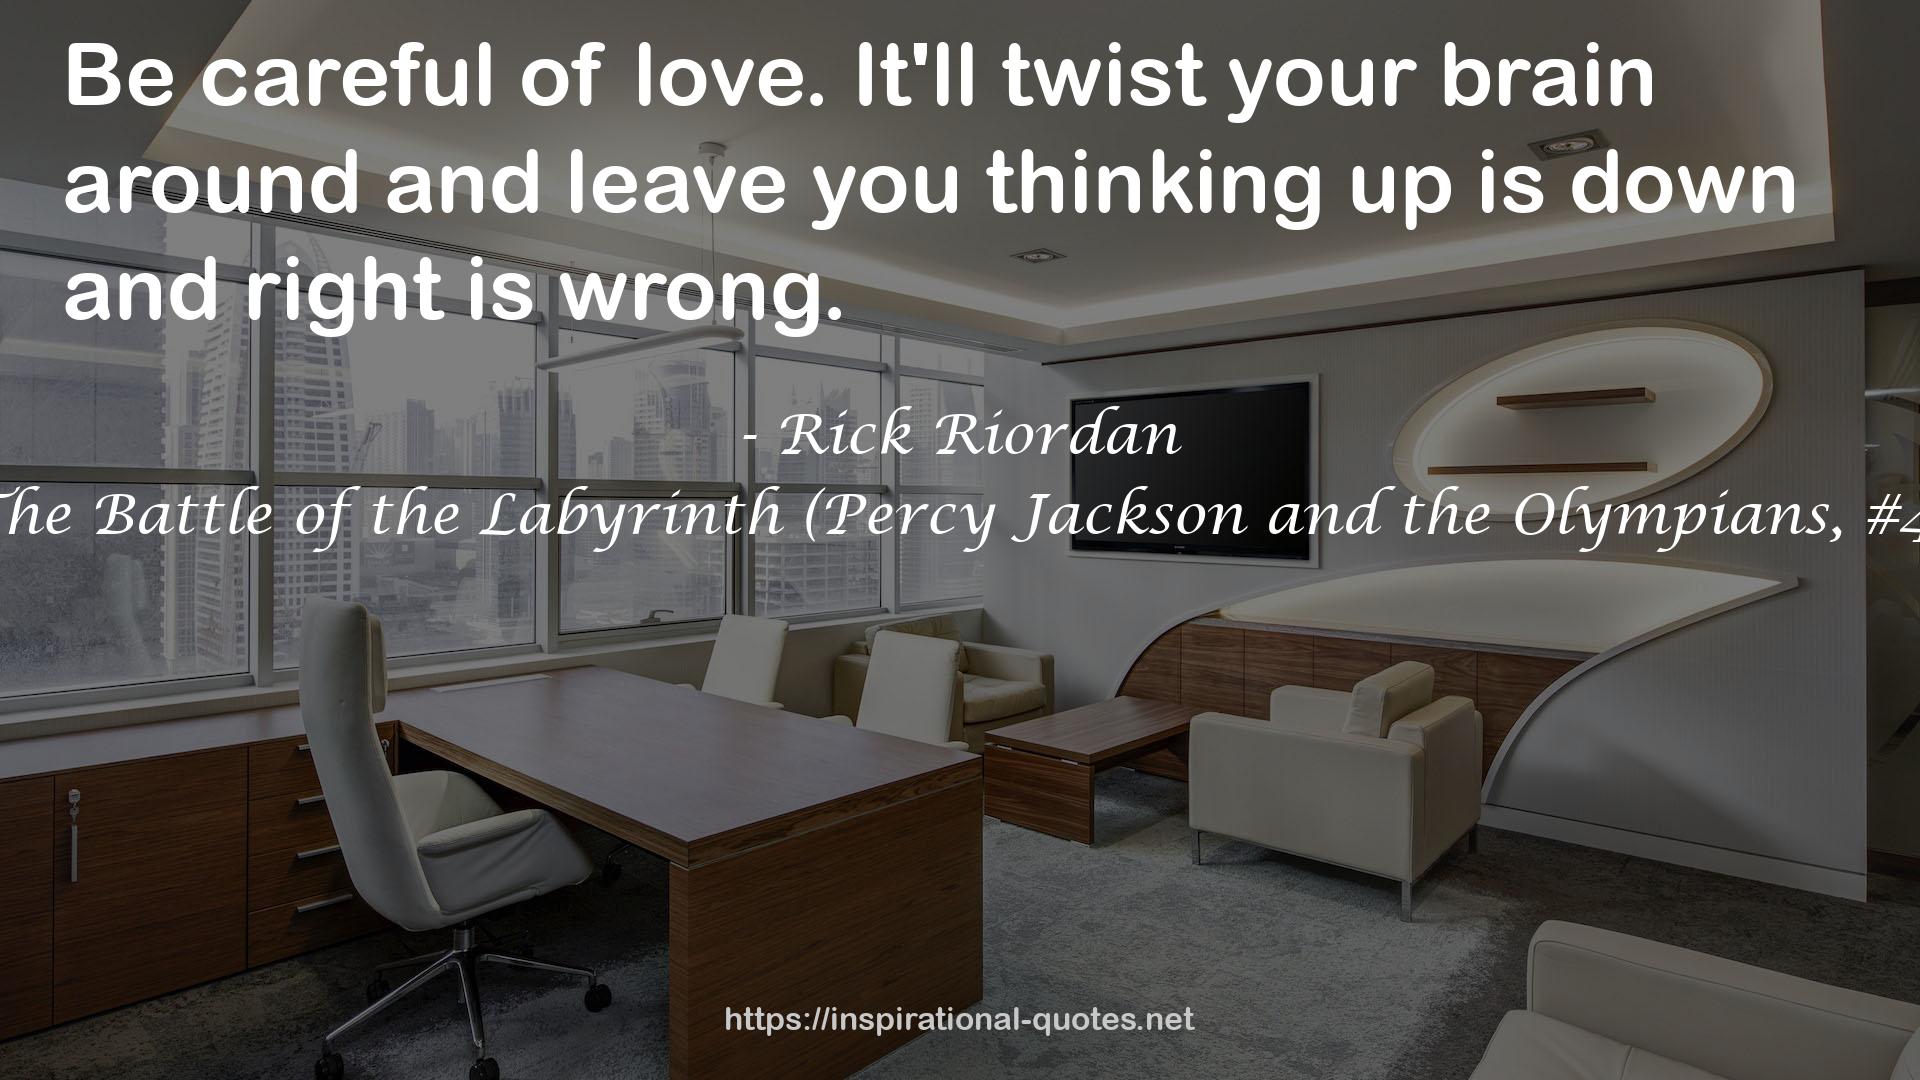 The Battle of the Labyrinth (Percy Jackson and the Olympians, #4) QUOTES